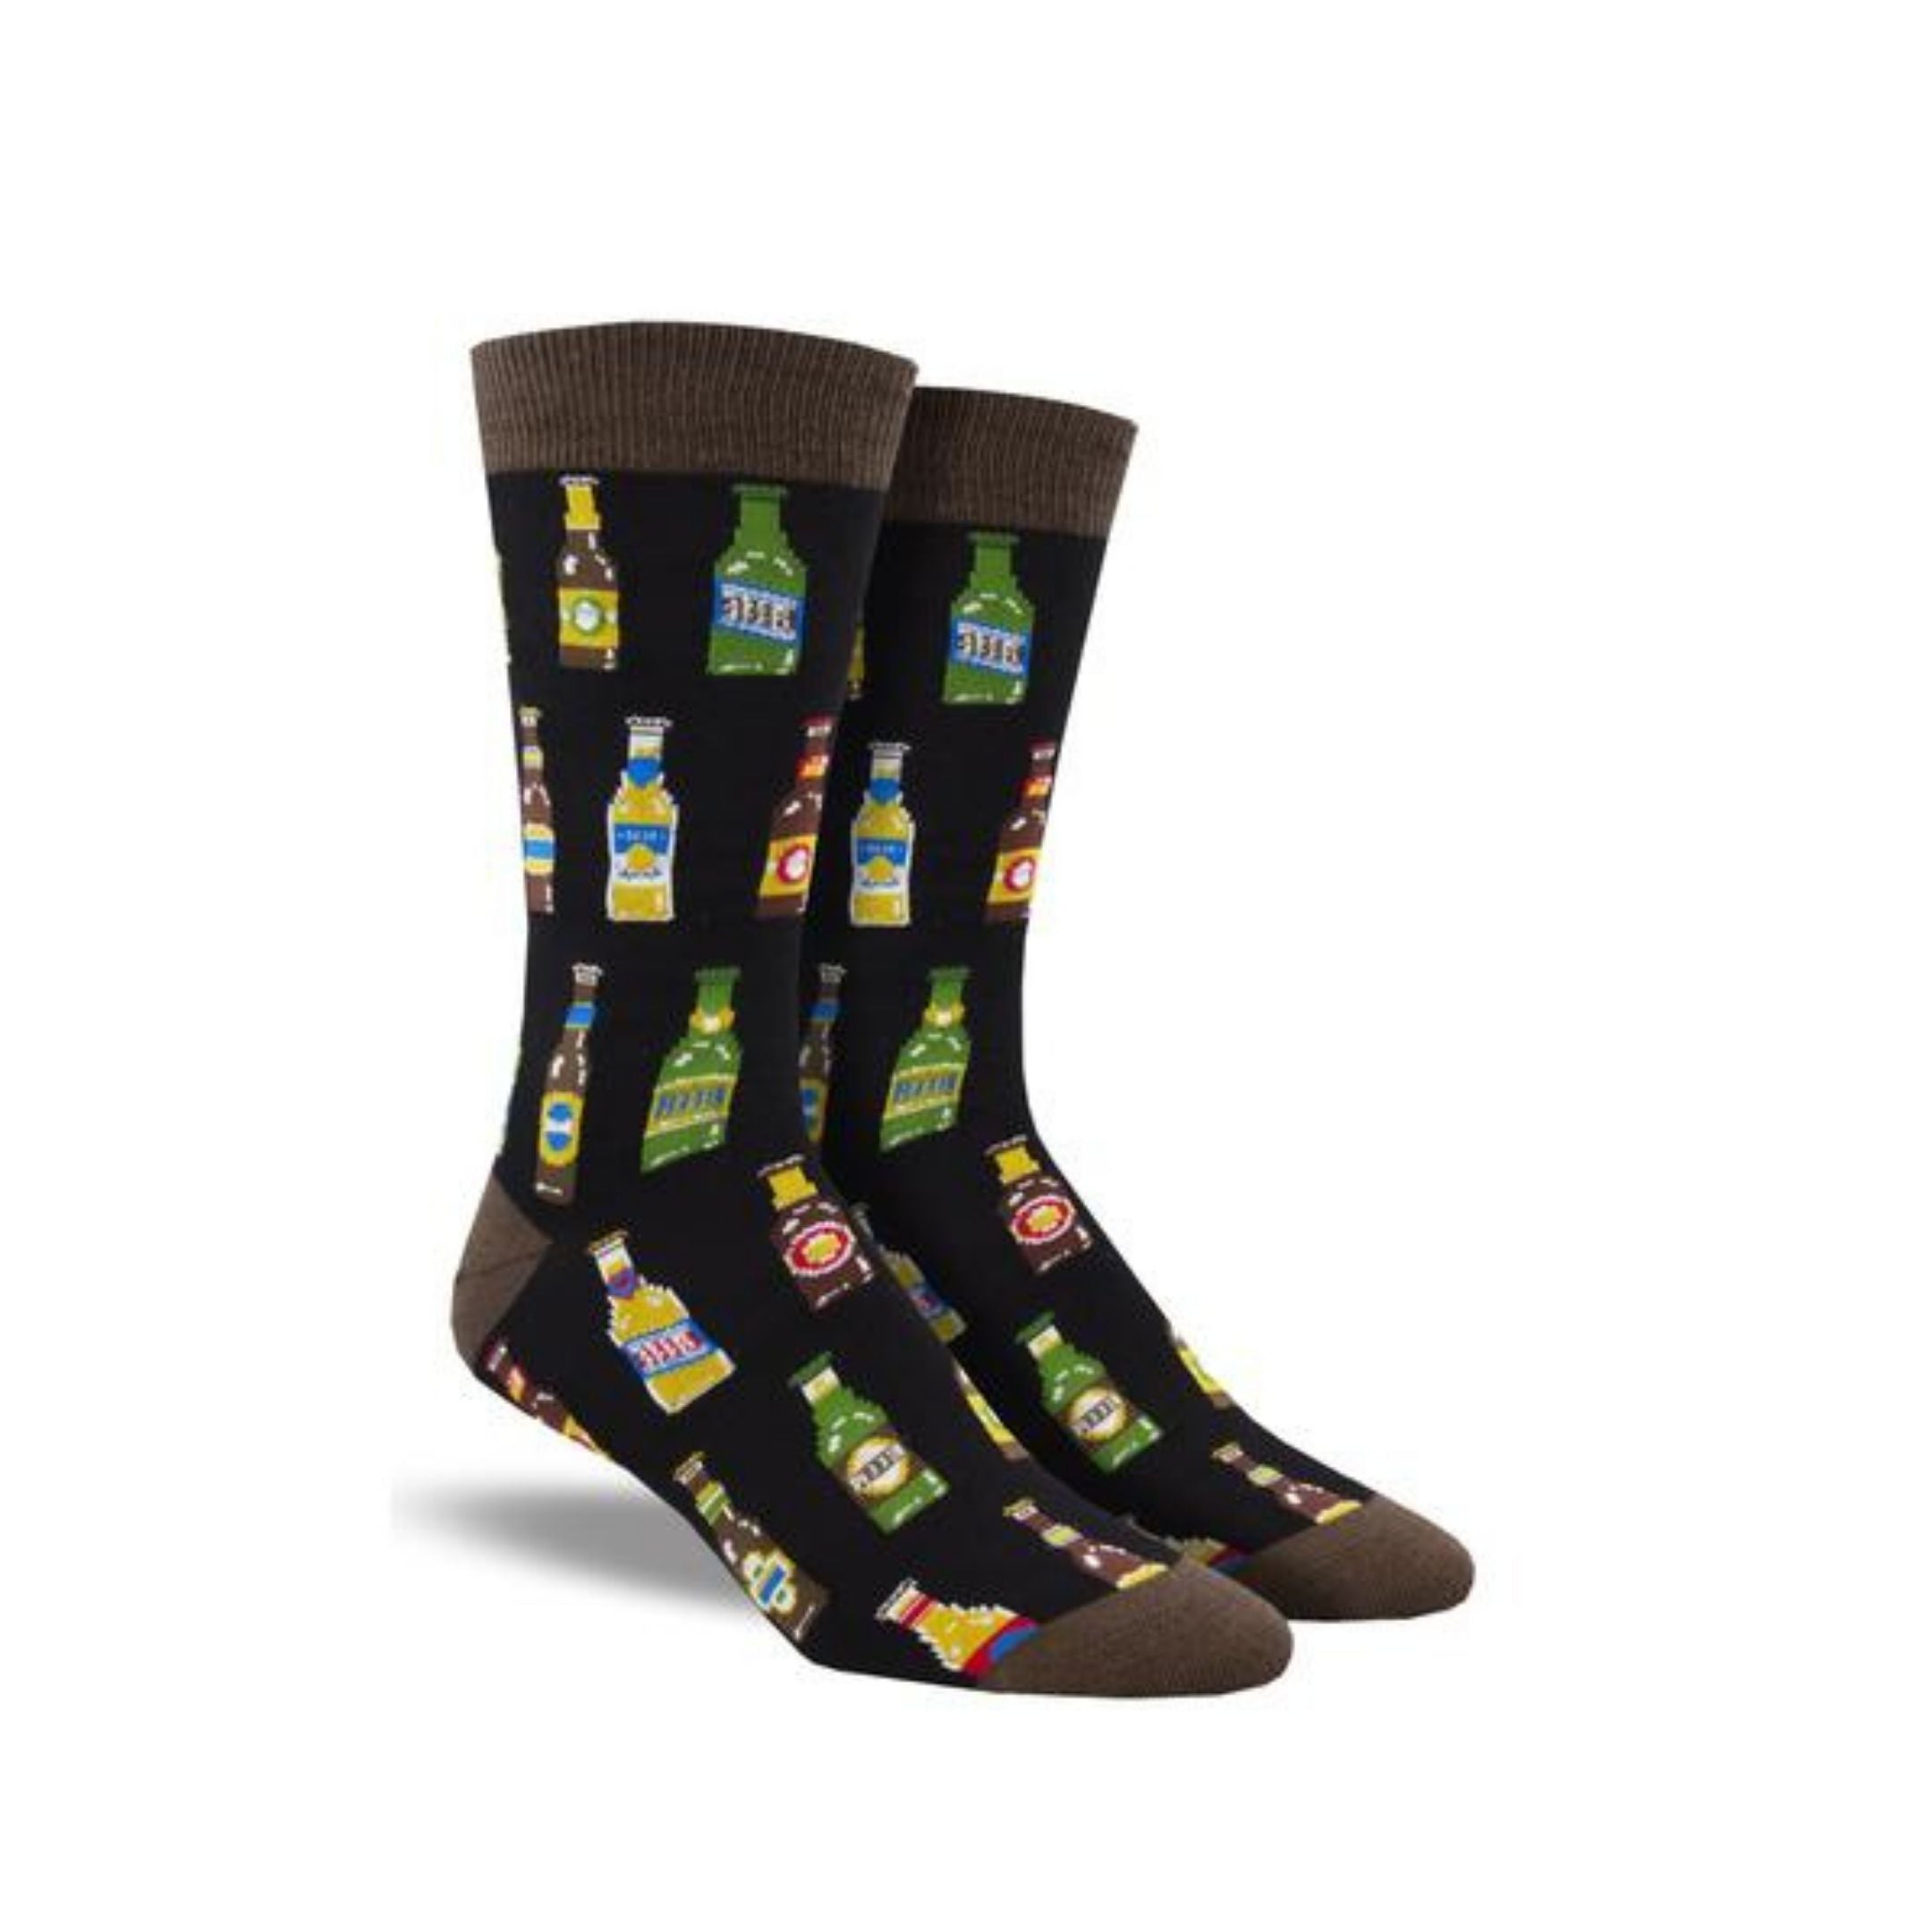 Black socks with brown accent toe, heel and top band with glass bottle pattern